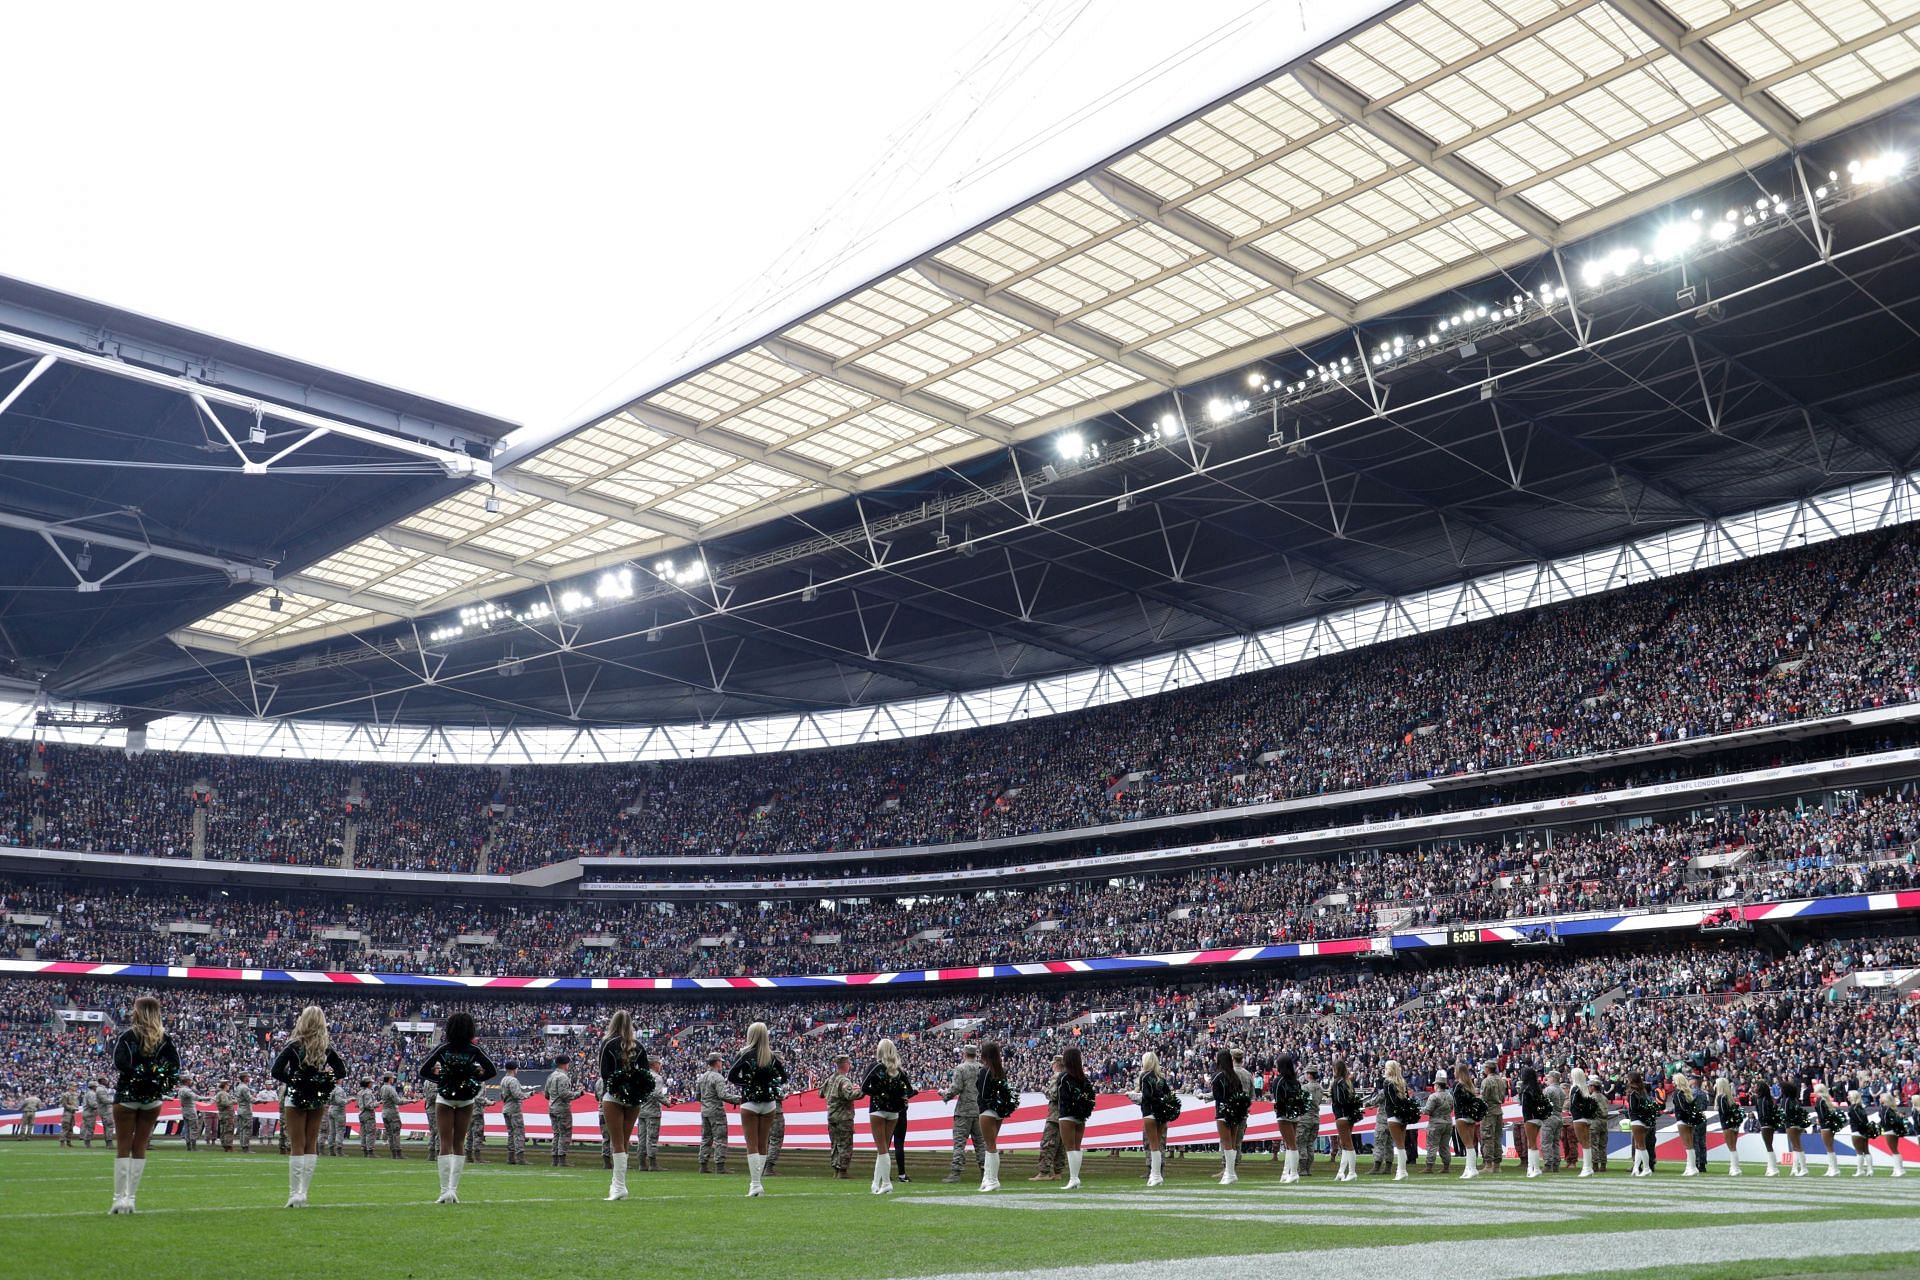 NFL International Games 2023: Location, Venue, Teams and more